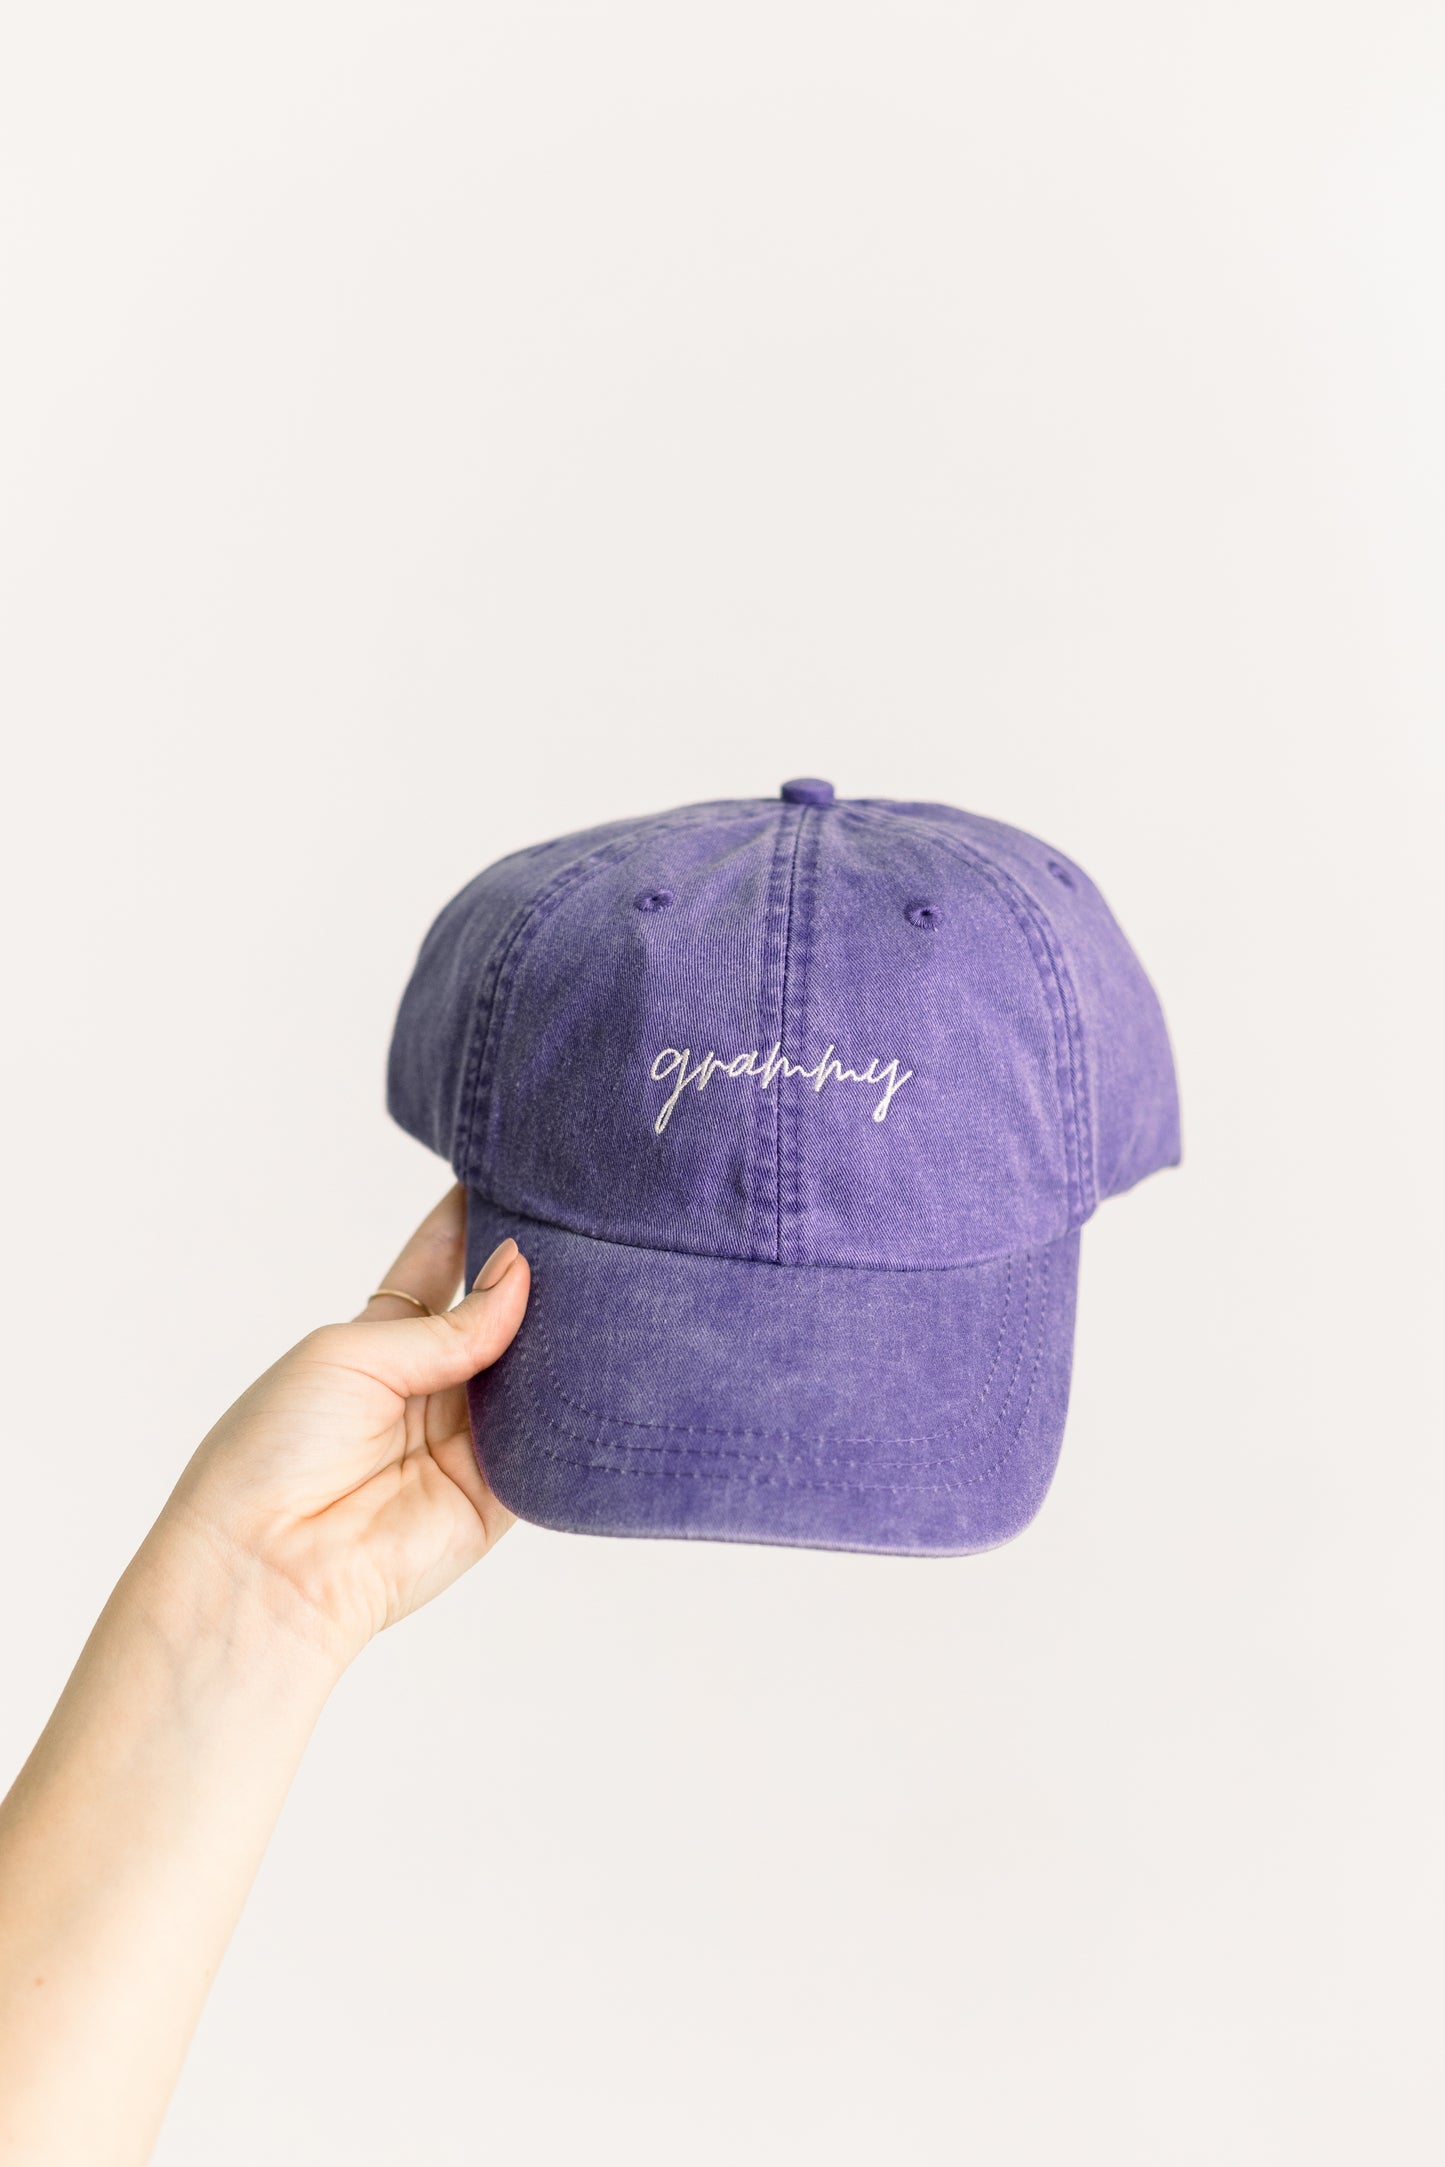 Grammy Embroidered Pigment-Dyed Baseball Cap (MoonTime Font) - Adult Unisex